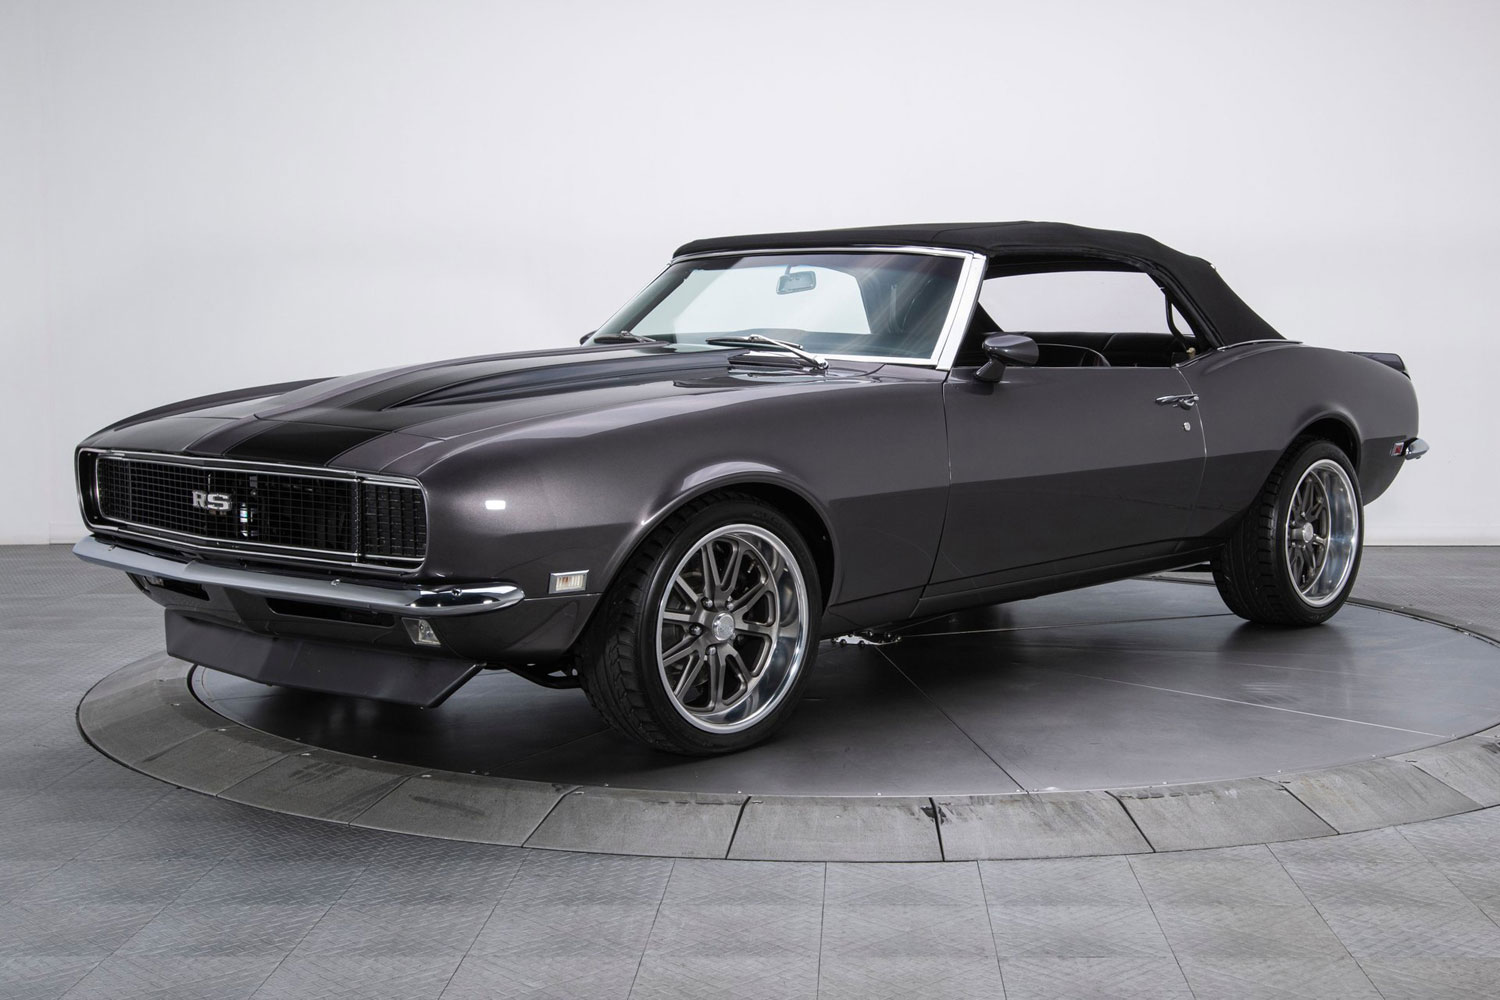 1968 Chevrolet Camaro Rs Restomod For Sale Video Gm Authority